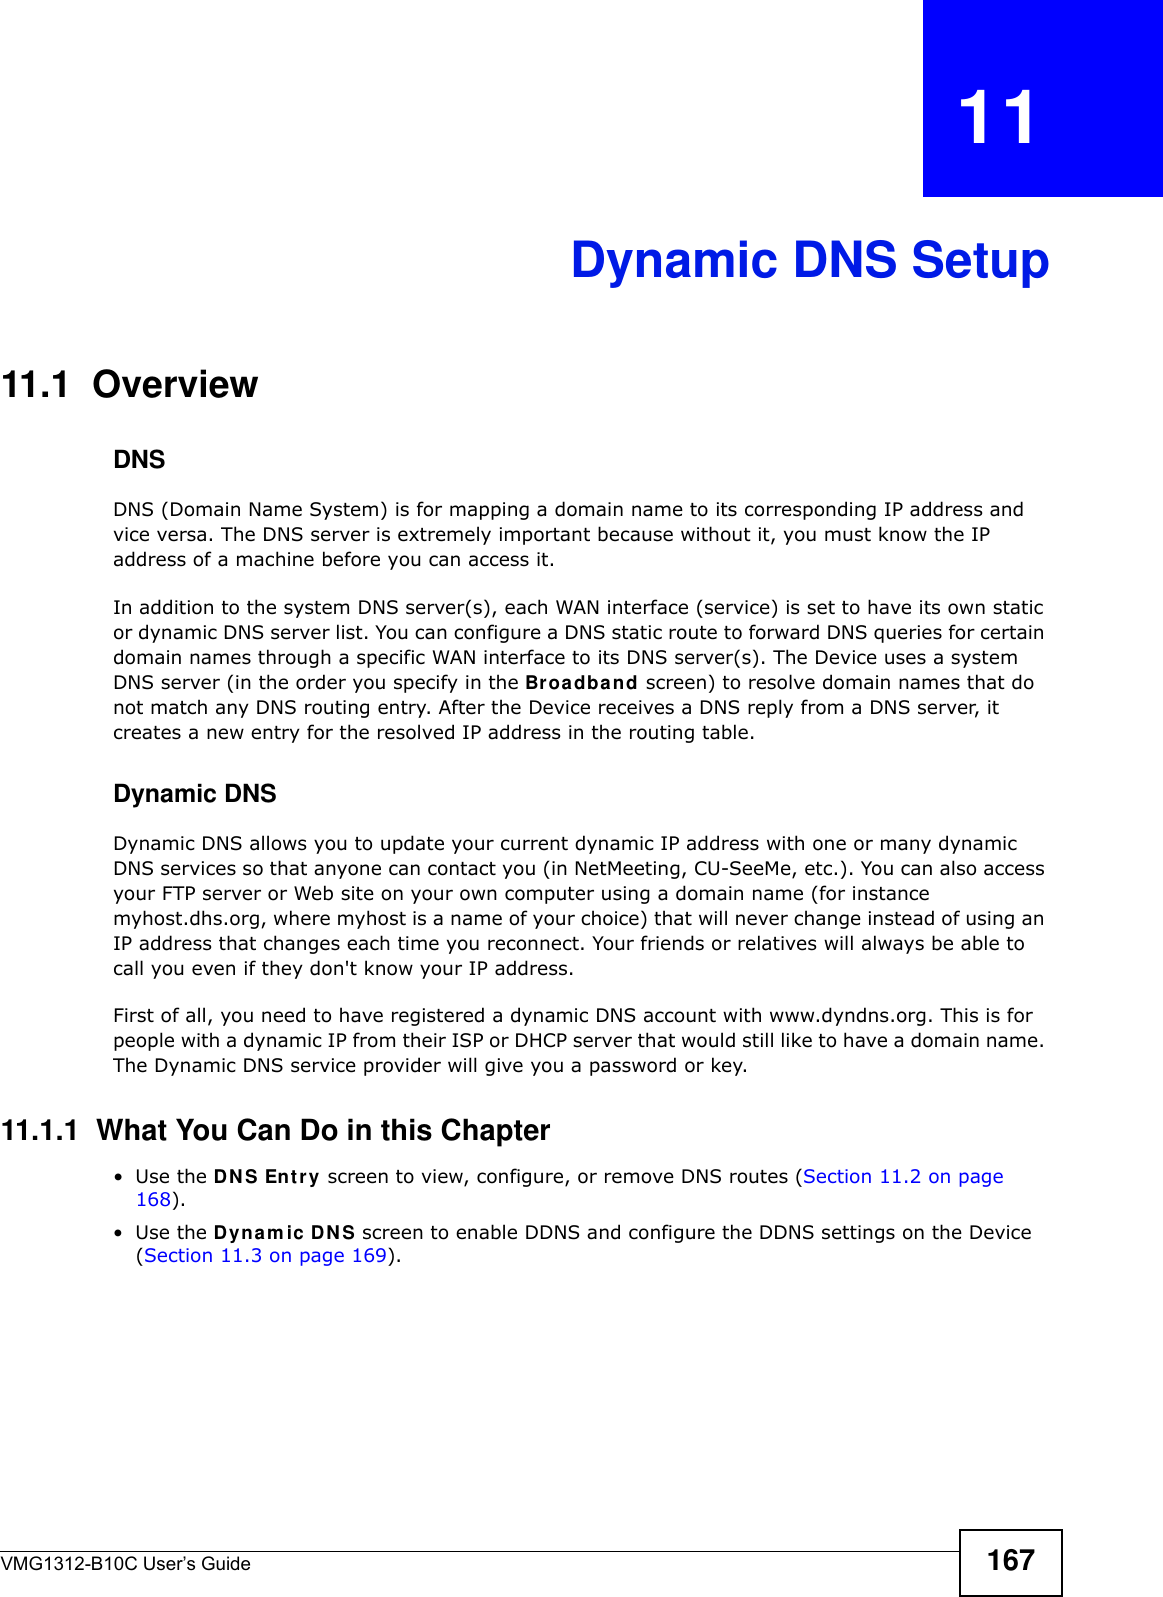 VMG1312-B10C User’s Guide 167CHAPTER   11Dynamic DNS Setup11.1  Overview DNSDNS (Domain Name System) is for mapping a domain name to its corresponding IP address and vice versa. The DNS server is extremely important because without it, you must know the IP address of a machine before you can access it. In addition to the system DNS server(s), each WAN interface (service) is set to have its own static or dynamic DNS server list. You can configure a DNS static route to forward DNS queries for certain domain names through a specific WAN interface to its DNS server(s). The Device uses a system DNS server (in the order you specify in the Broa dba nd screen) to resolve domain names that do not match any DNS routing entry. After the Device receives a DNS reply from a DNS server, it creates a new entry for the resolved IP address in the routing table.Dynamic DNSDynamic DNS allows you to update your current dynamic IP address with one or many dynamic DNS services so that anyone can contact you (in NetMeeting, CU-SeeMe, etc.). You can also access your FTP server or Web site on your own computer using a domain name (for instance myhost.dhs.org, where myhost is a name of your choice) that will never change instead of using an IP address that changes each time you reconnect. Your friends or relatives will always be able to call you even if they don&apos;t know your IP address.First of all, you need to have registered a dynamic DNS account with www.dyndns.org. This is for people with a dynamic IP from their ISP or DHCP server that would still like to have a domain name. The Dynamic DNS service provider will give you a password or key. 11.1.1  What You Can Do in this Chapter•Use the DN S Ent ry screen to view, configure, or remove DNS routes (Section 11.2 on page 168).•Use the Dyna m ic D N S screen to enable DDNS and configure the DDNS settings on the Device (Section 11.3 on page 169).